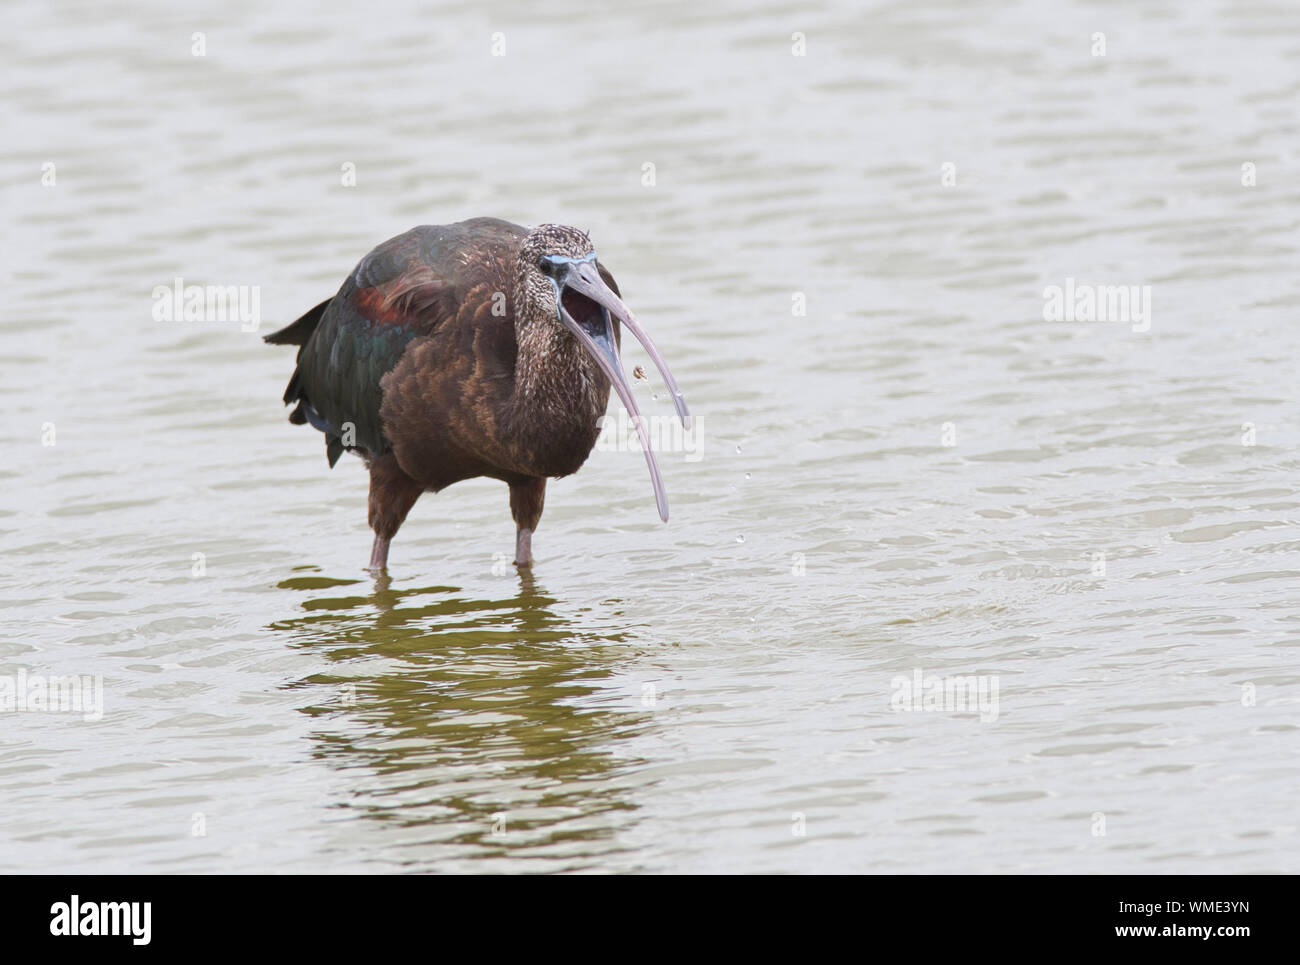 Glossy ibis (Plegadis falcinellus) foraging in shallow water. The bird has caught what appears to be a snail or other small mollusc. Stock Photo